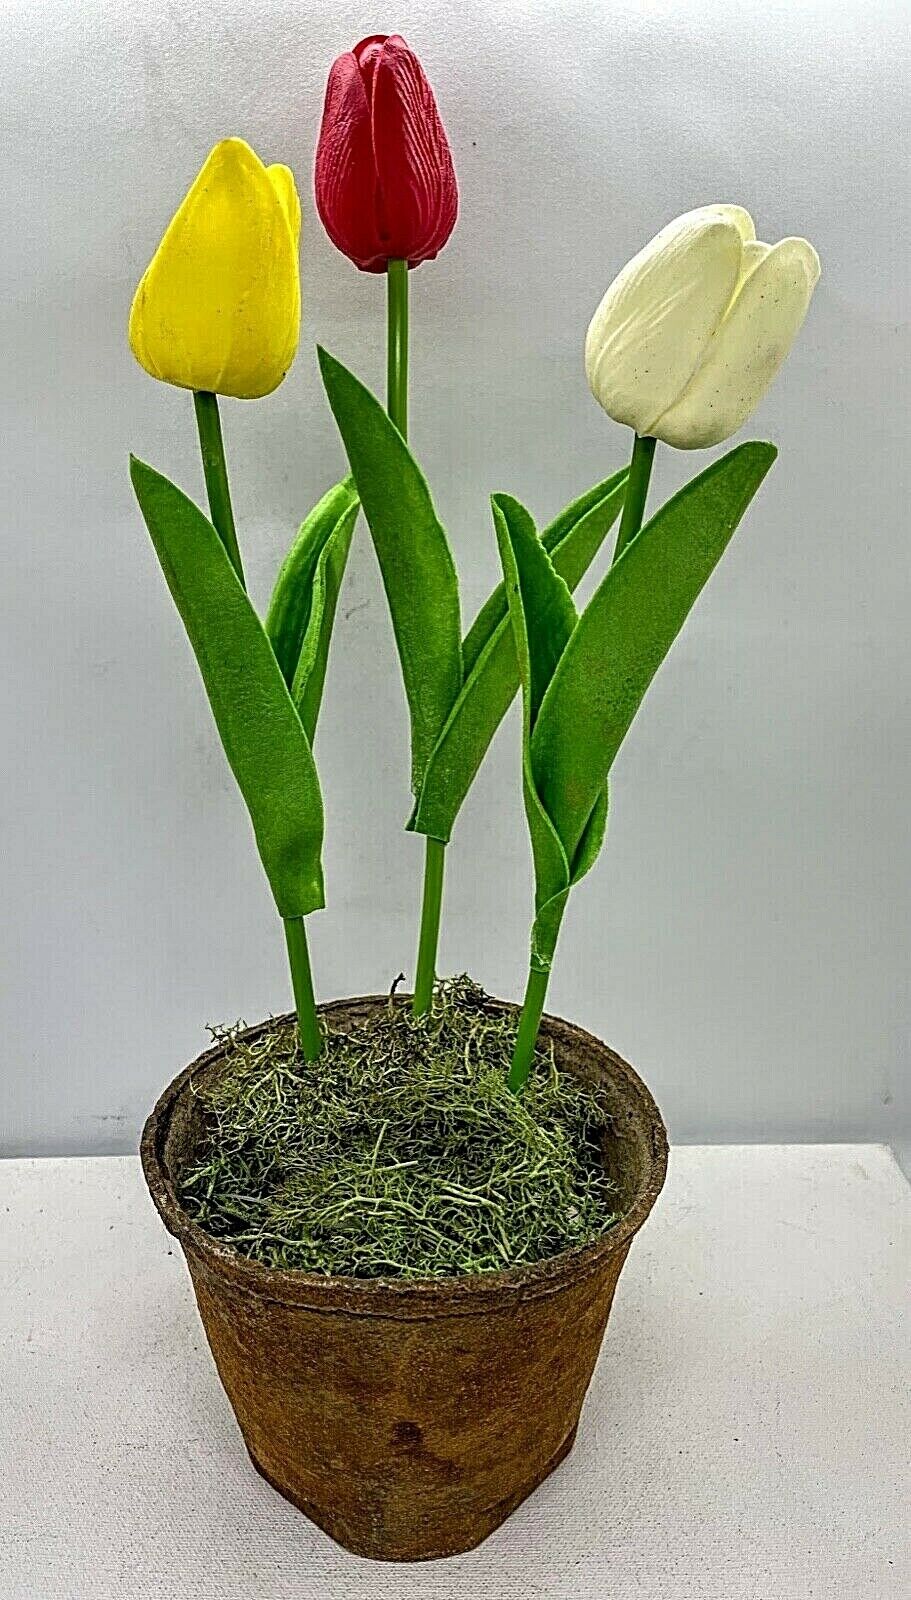 Primitive Farmhouse Spring Faux Tulips in Wax Dipped Pot - The Primitive Pineapple Collection